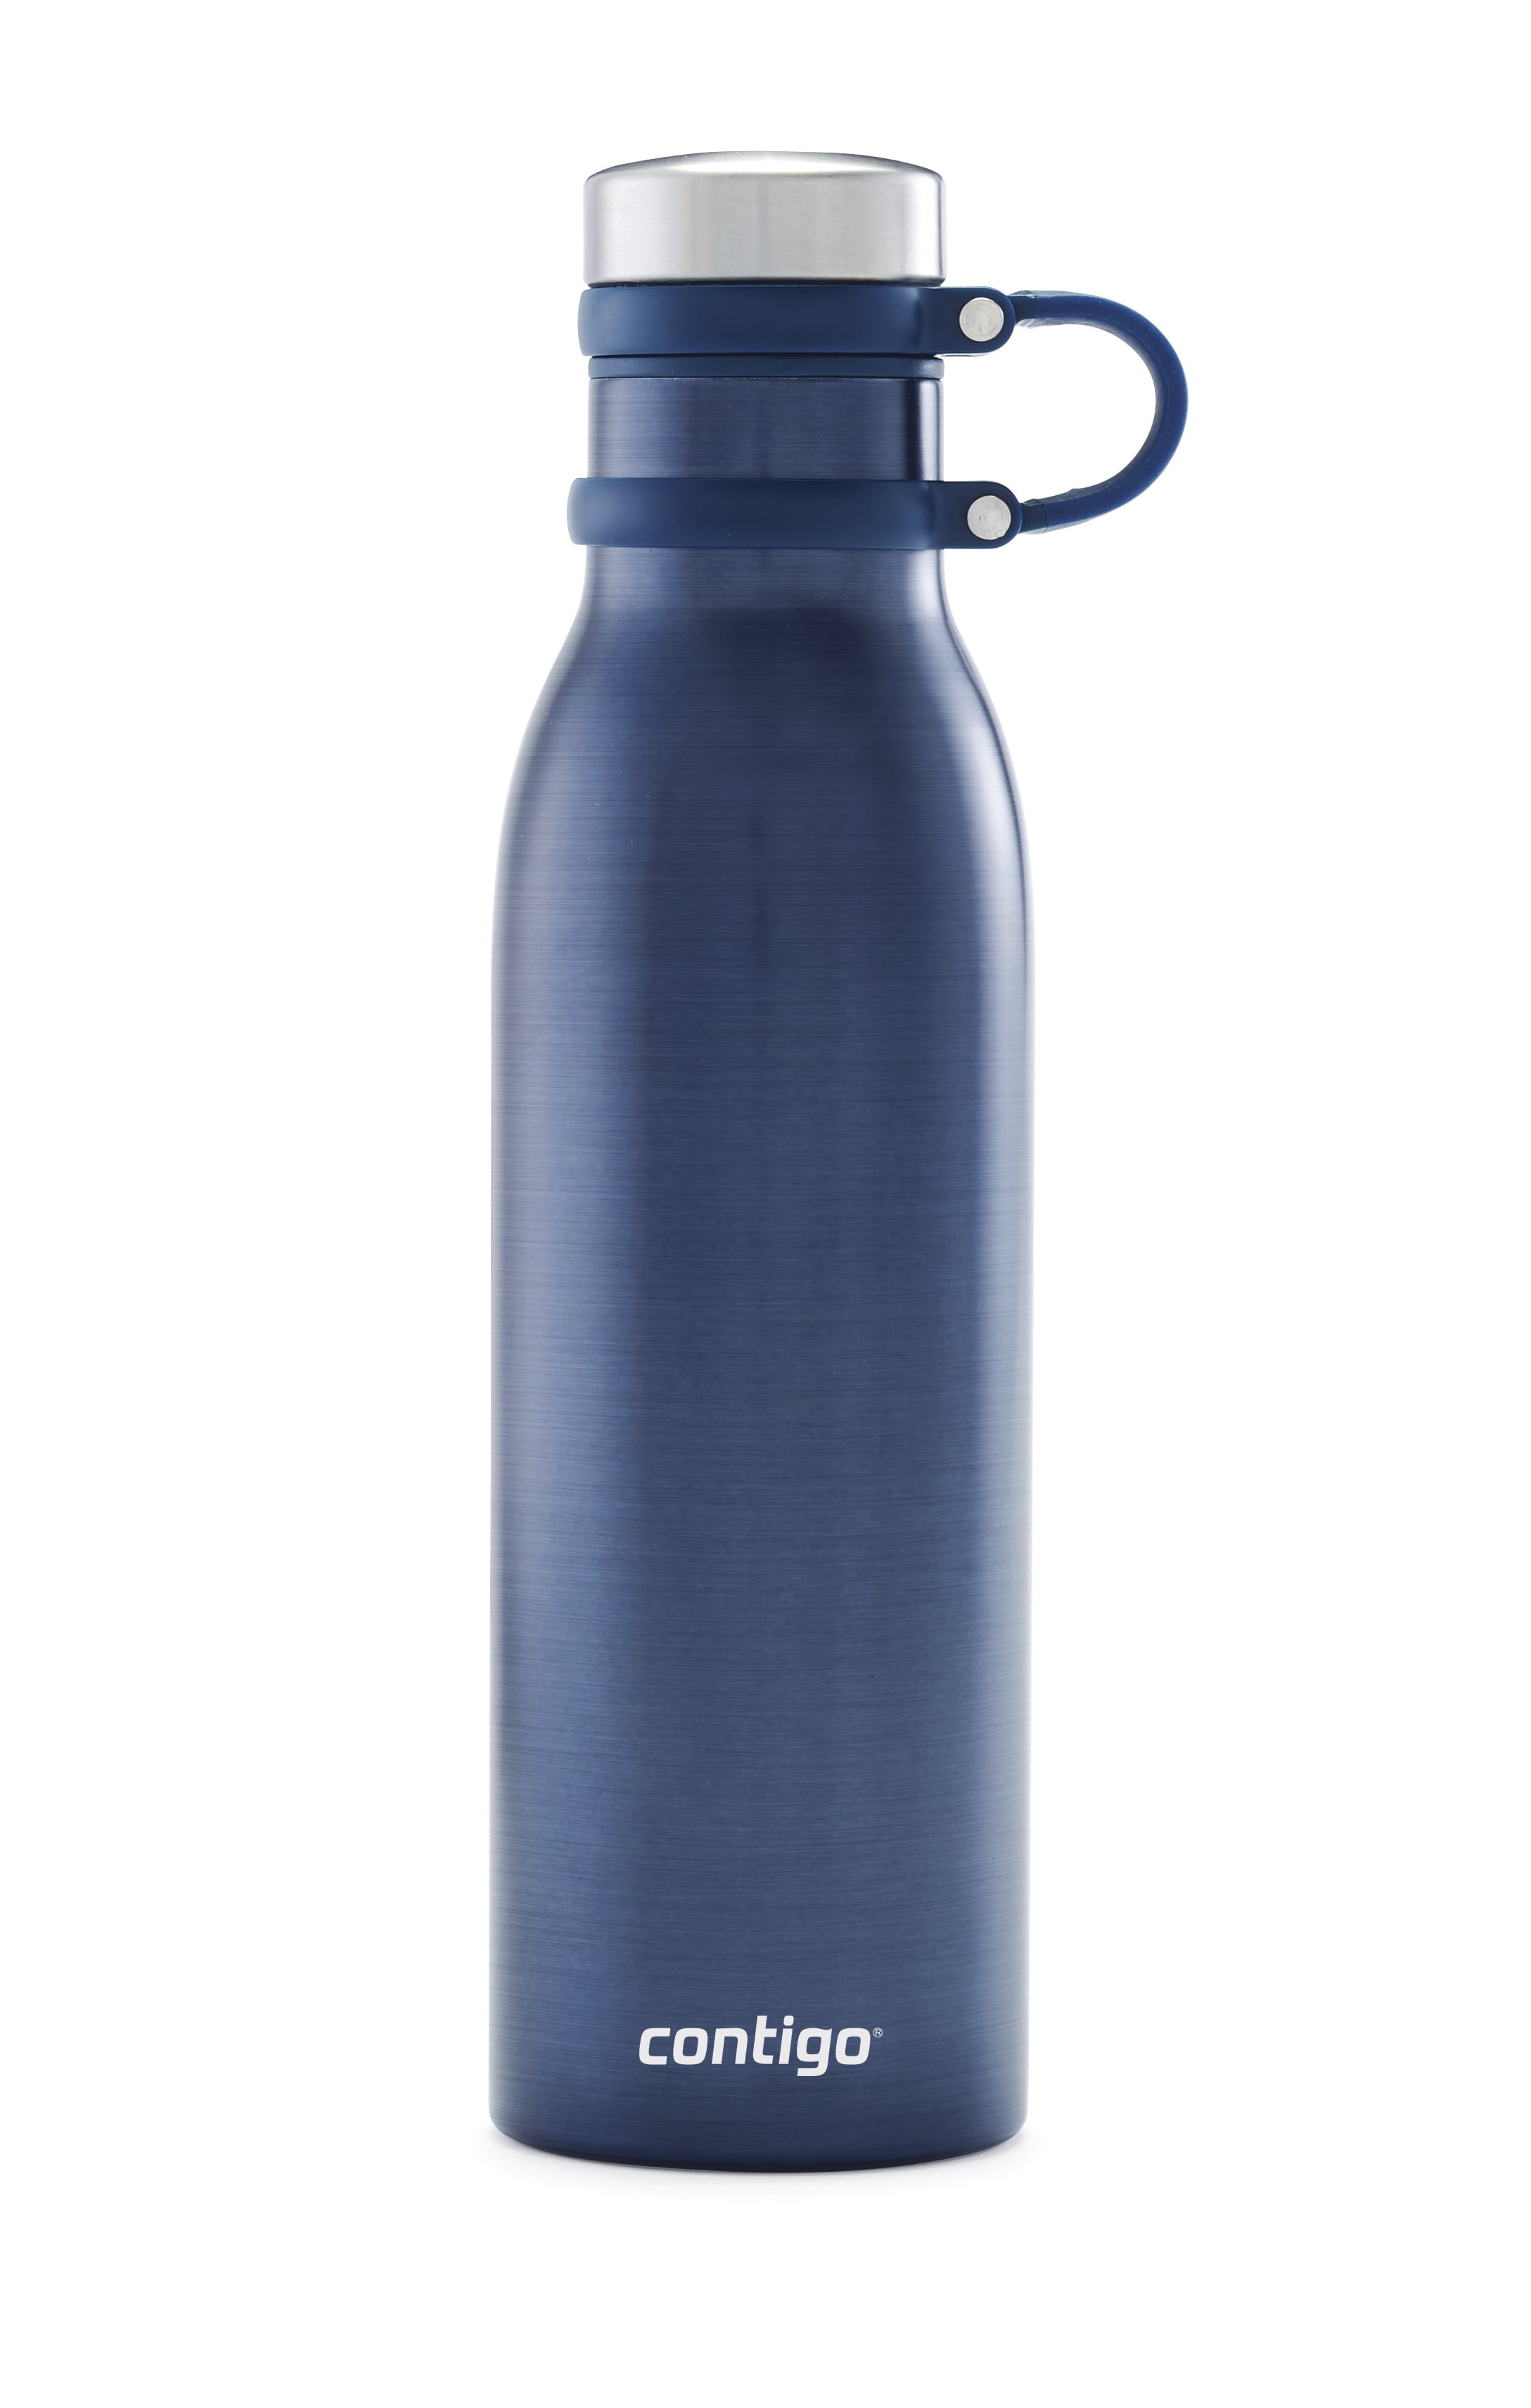 Coocuture Thermos Water Bottle 20 Oz Insulated Stainless Steel Vacuum Flask  Keeps Liquids Hot&Cold, Leak Proof and Double-Walled Design - Blue